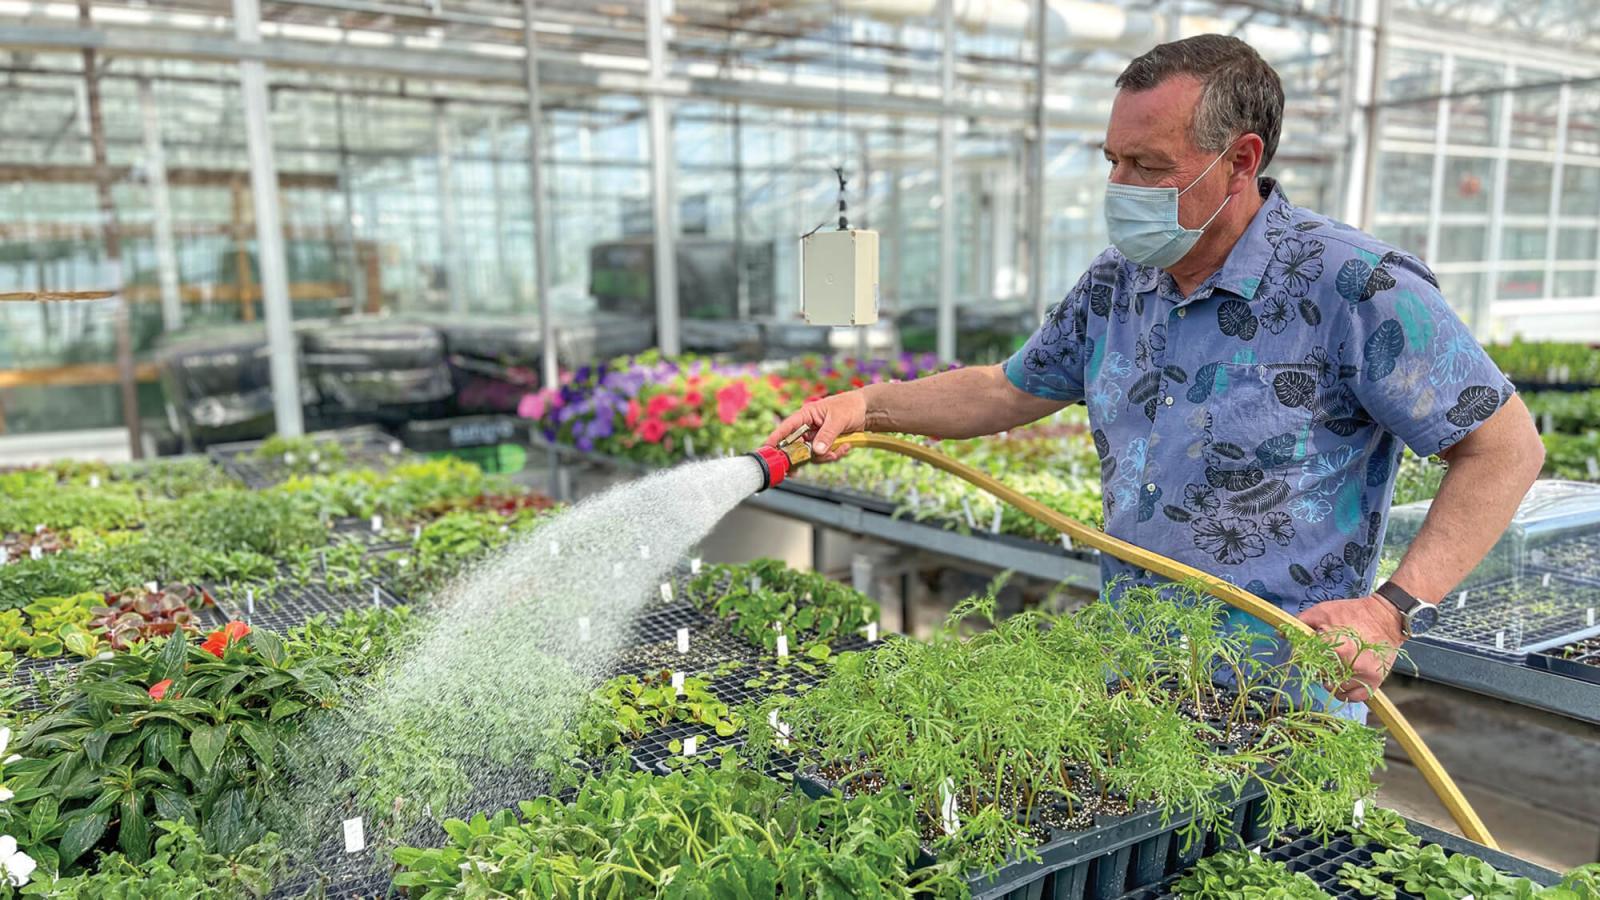 Watering young plants that were propagated by seed in 288 cell plug trays.